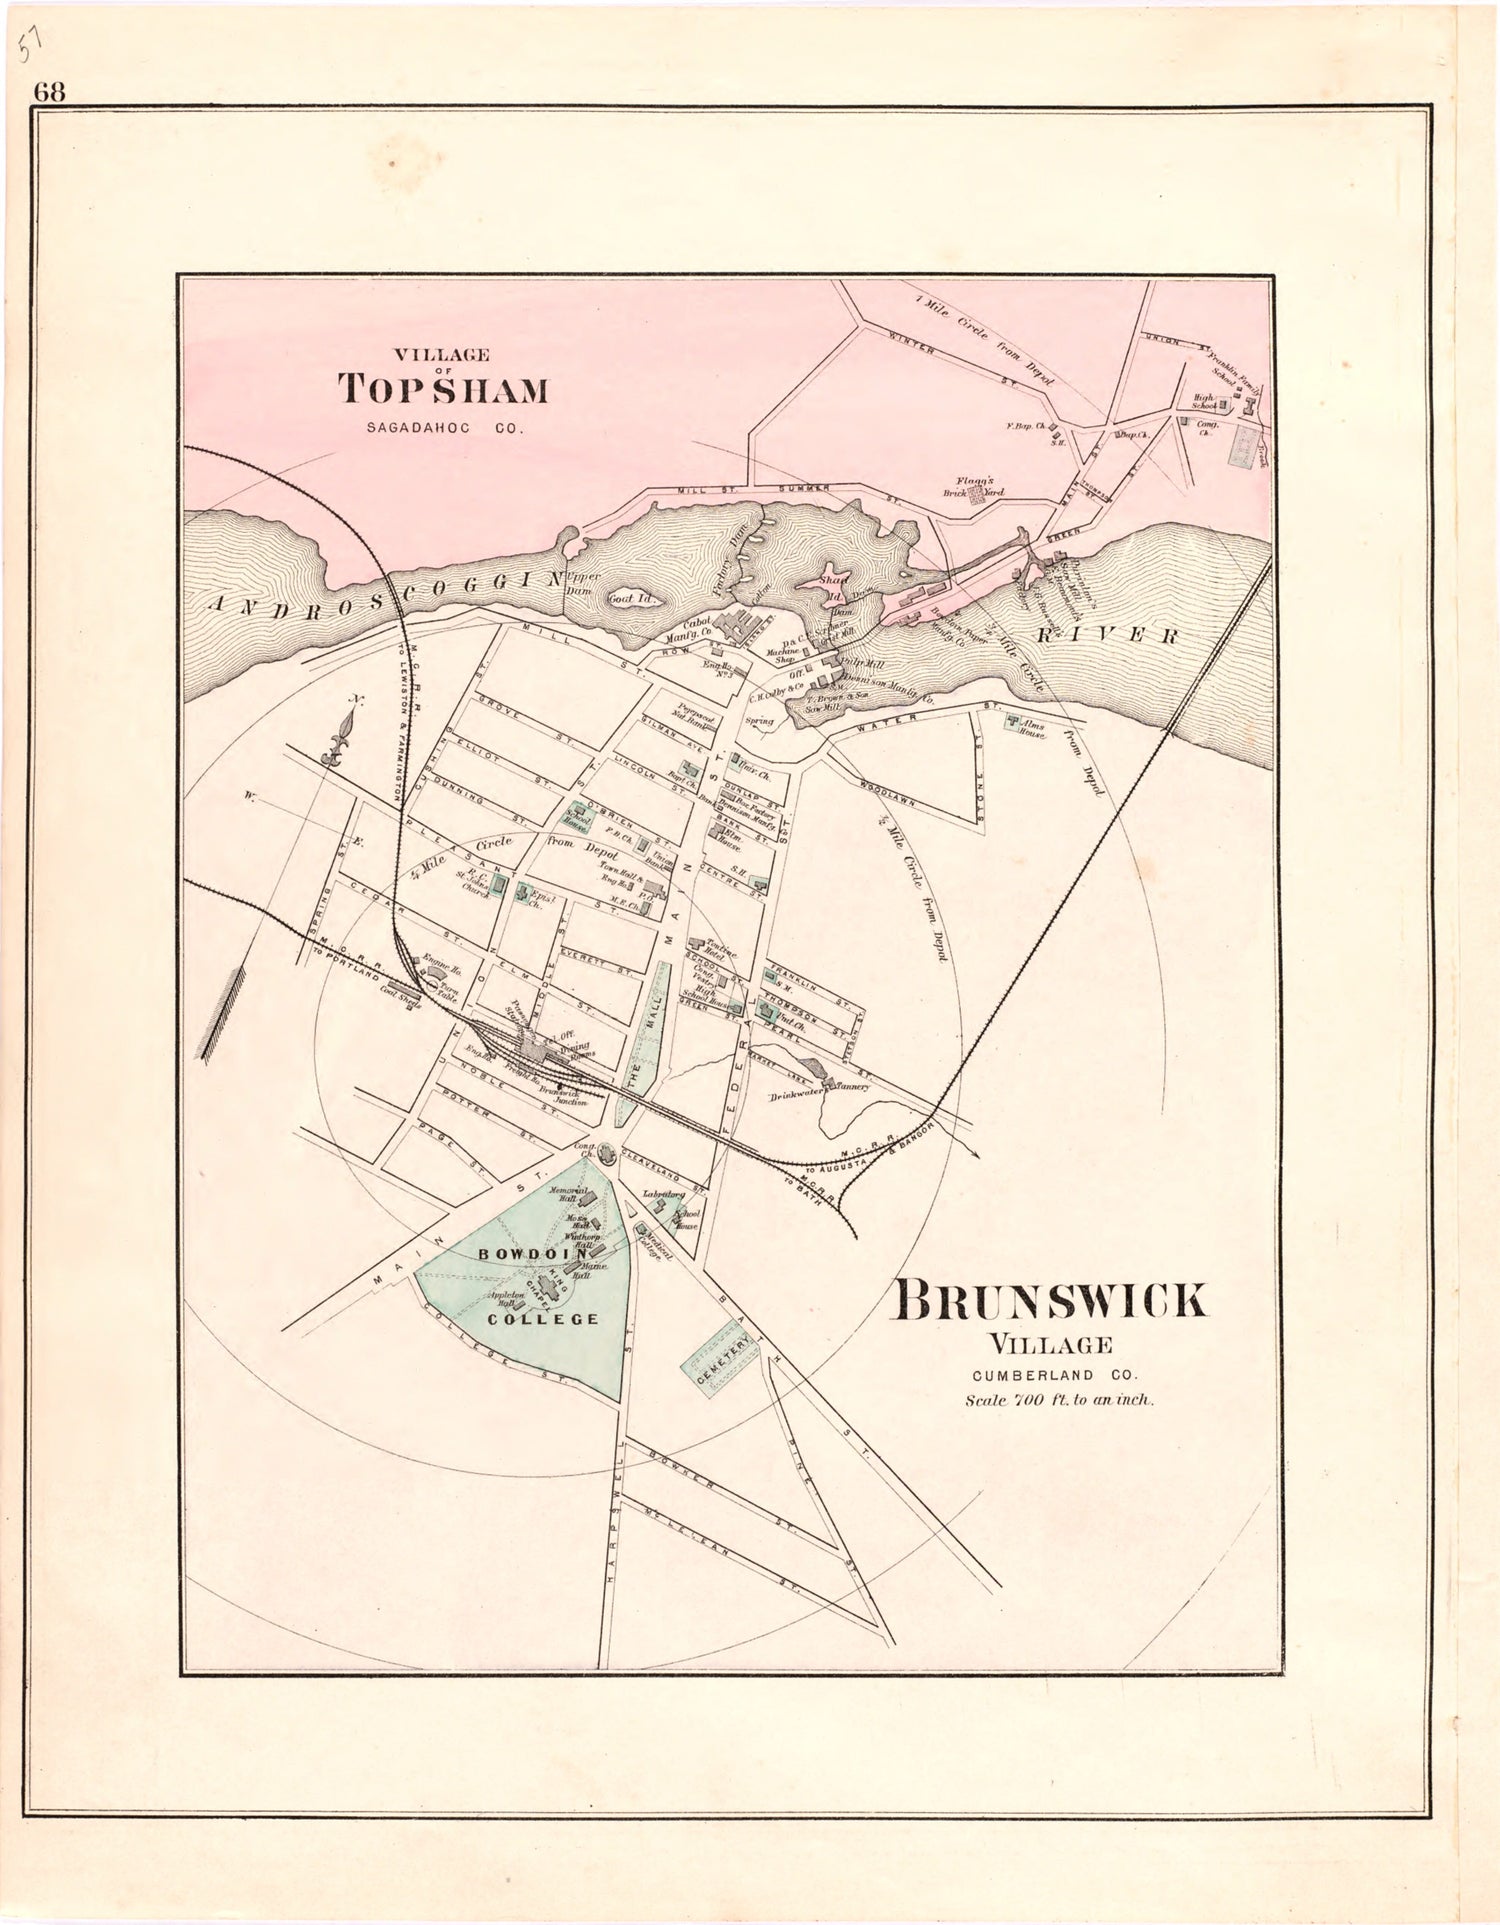 This hand drawn illustration (map) of Village of Topsham; Brunswick Village from Colby&